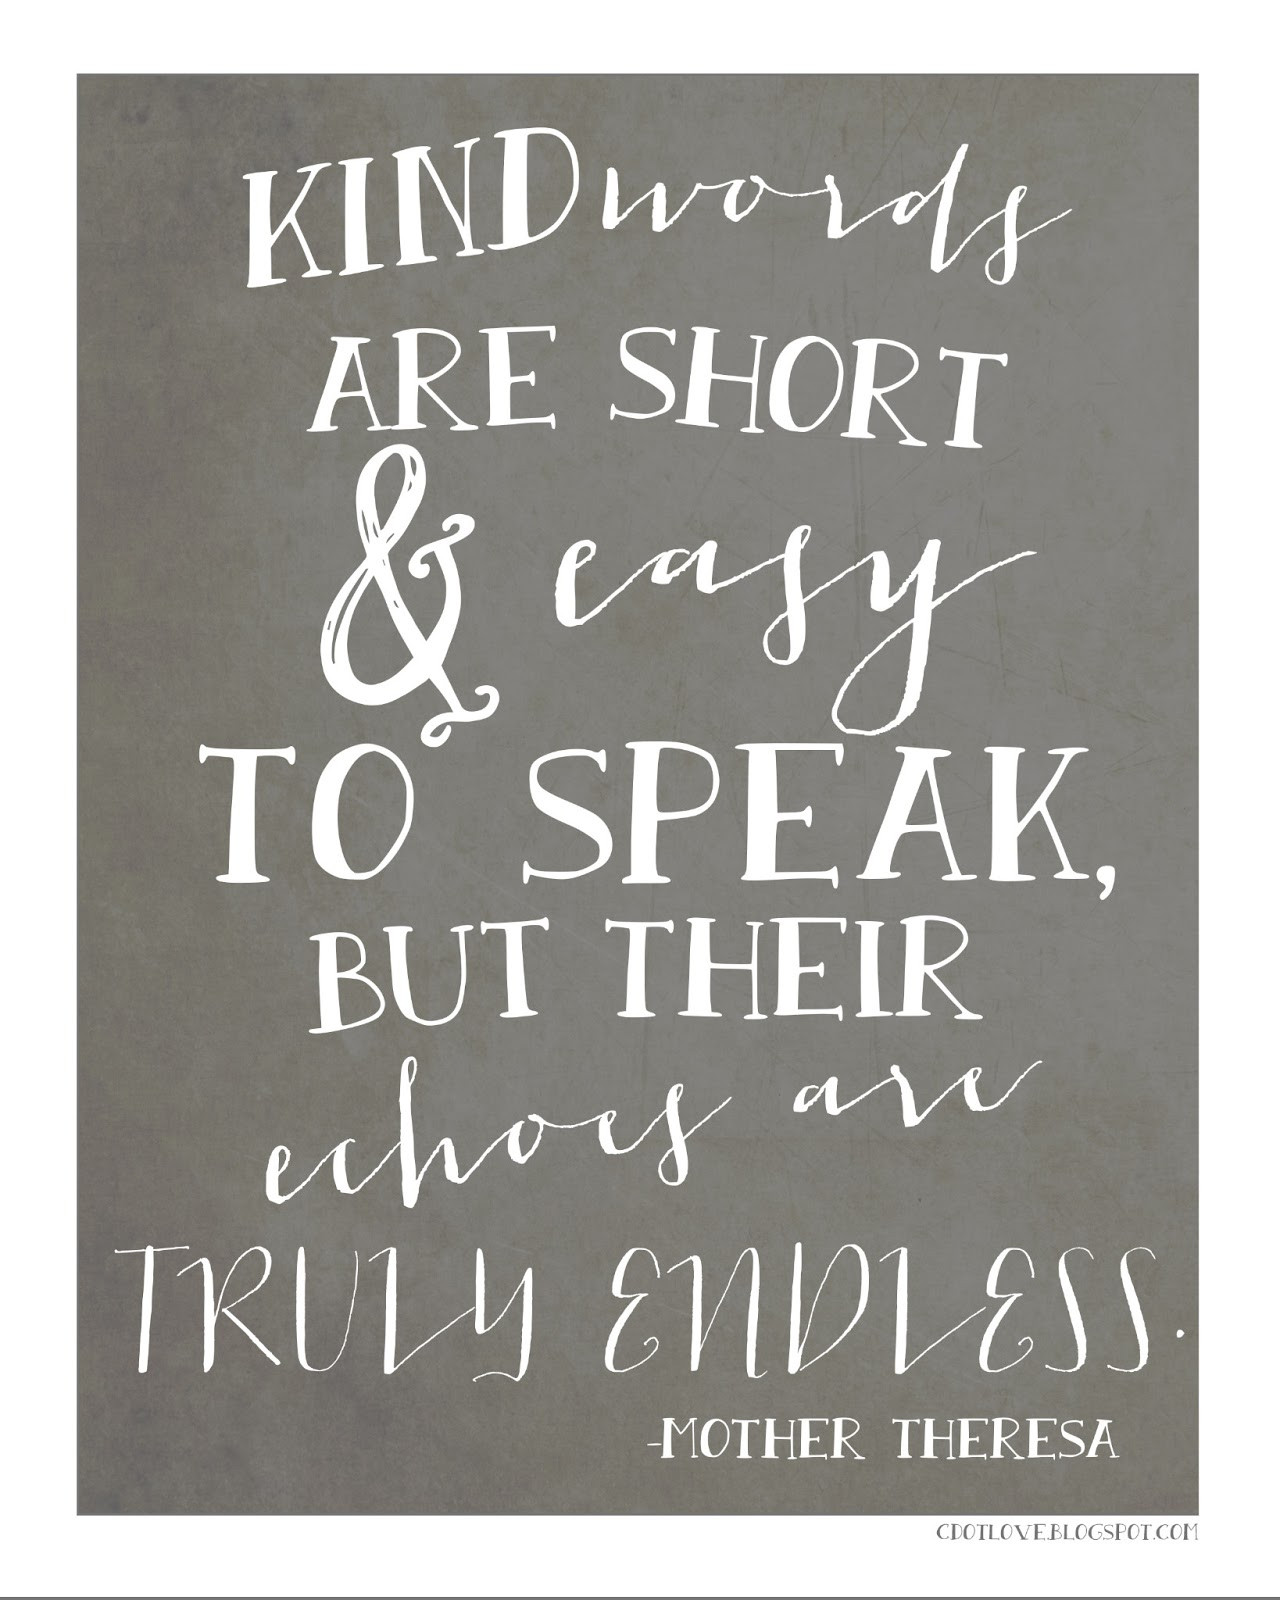 Short Kindness Quotes
 Kind words are short & easy to speak But their echoes are